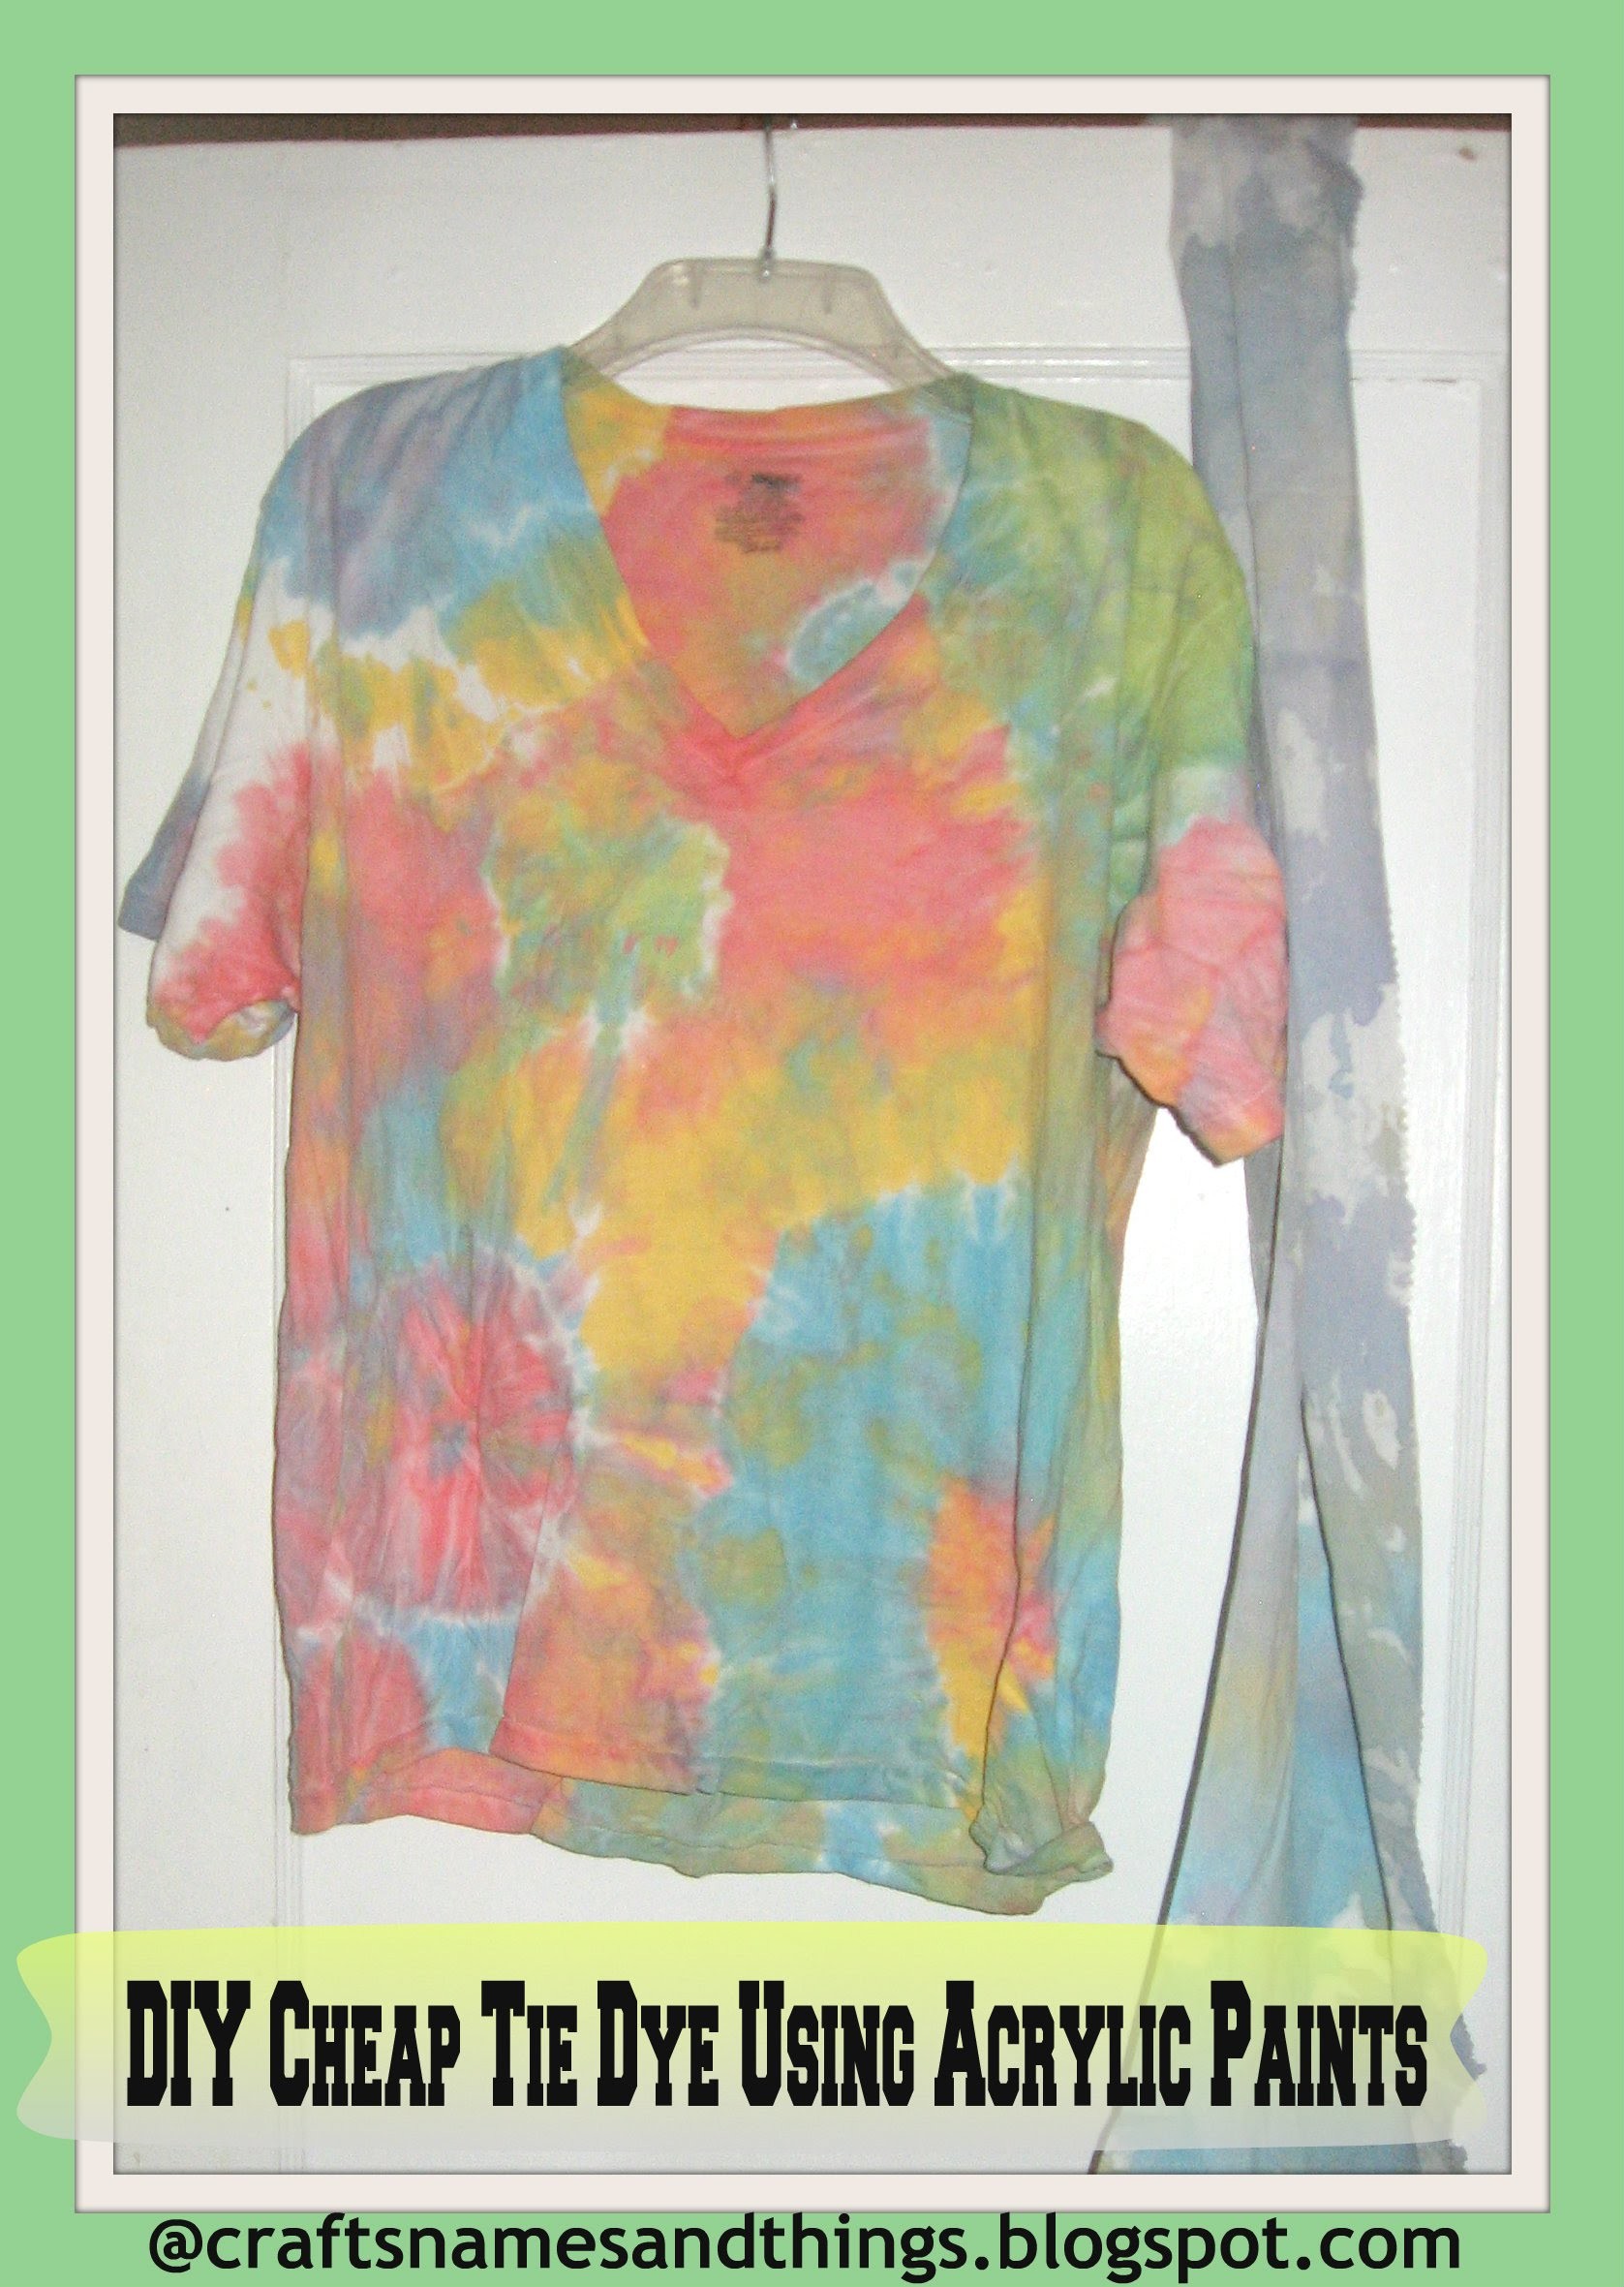 DIY Tie-Dye T-Shirts | How To | Tutorial.How to Tie Dye Using Acrylic Paints